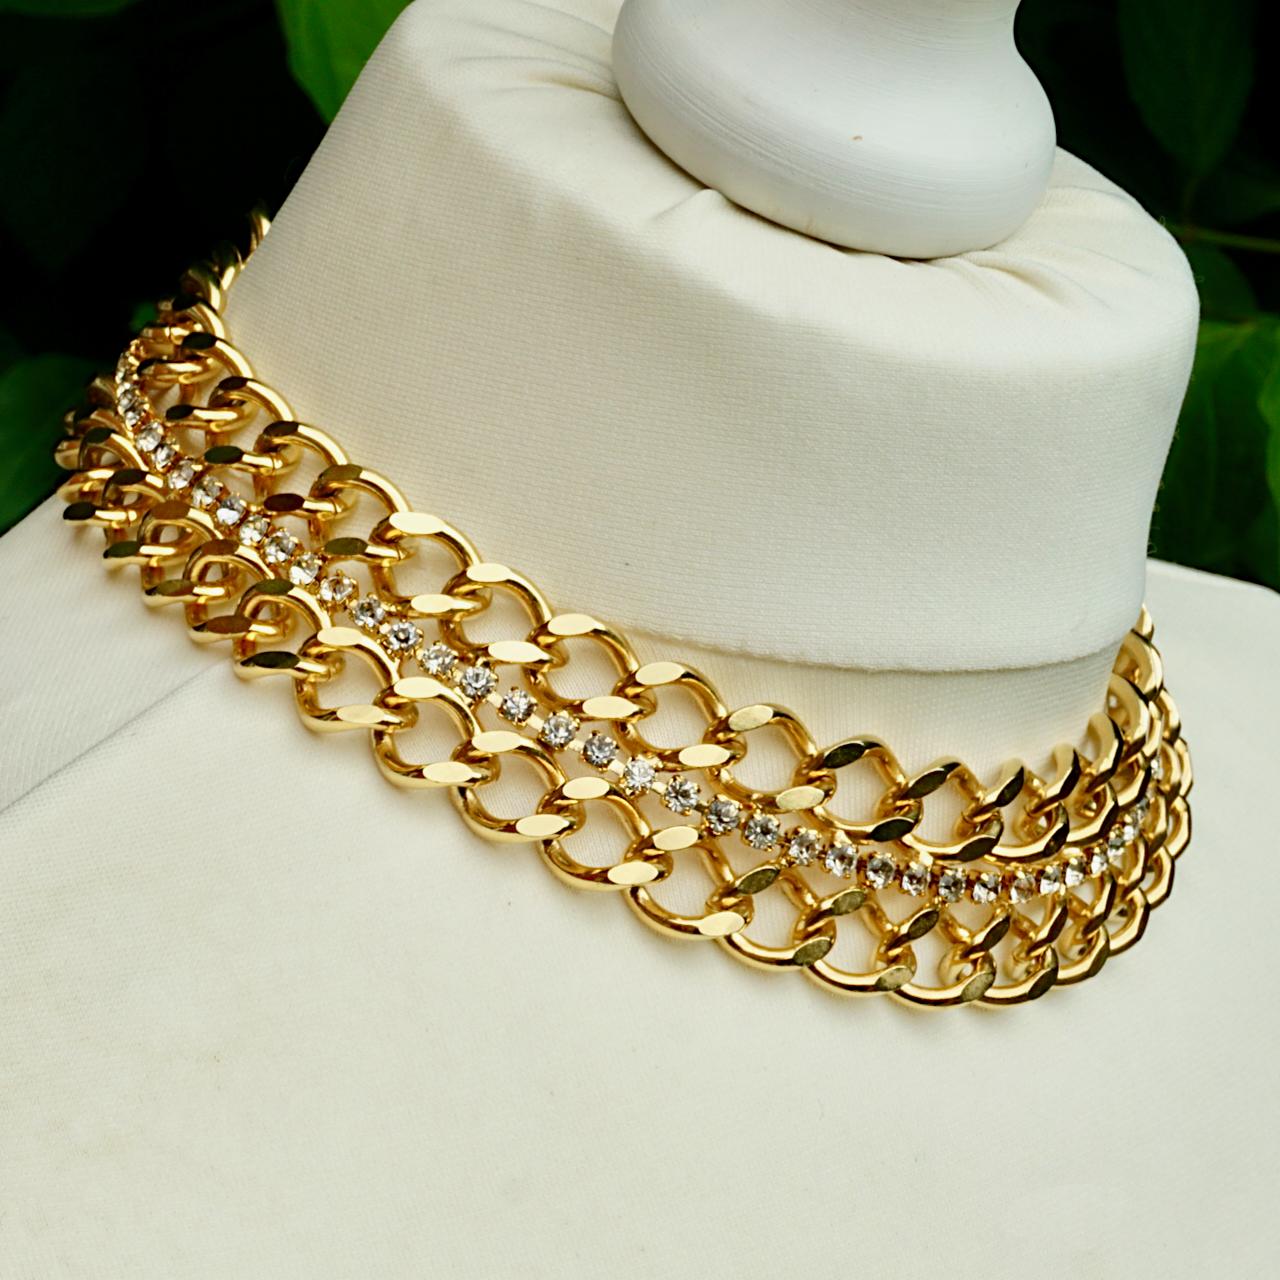 Gold Plated Curb Link Chain Collar Necklace with Rhinestones circa 1980s In Excellent Condition For Sale In London, GB